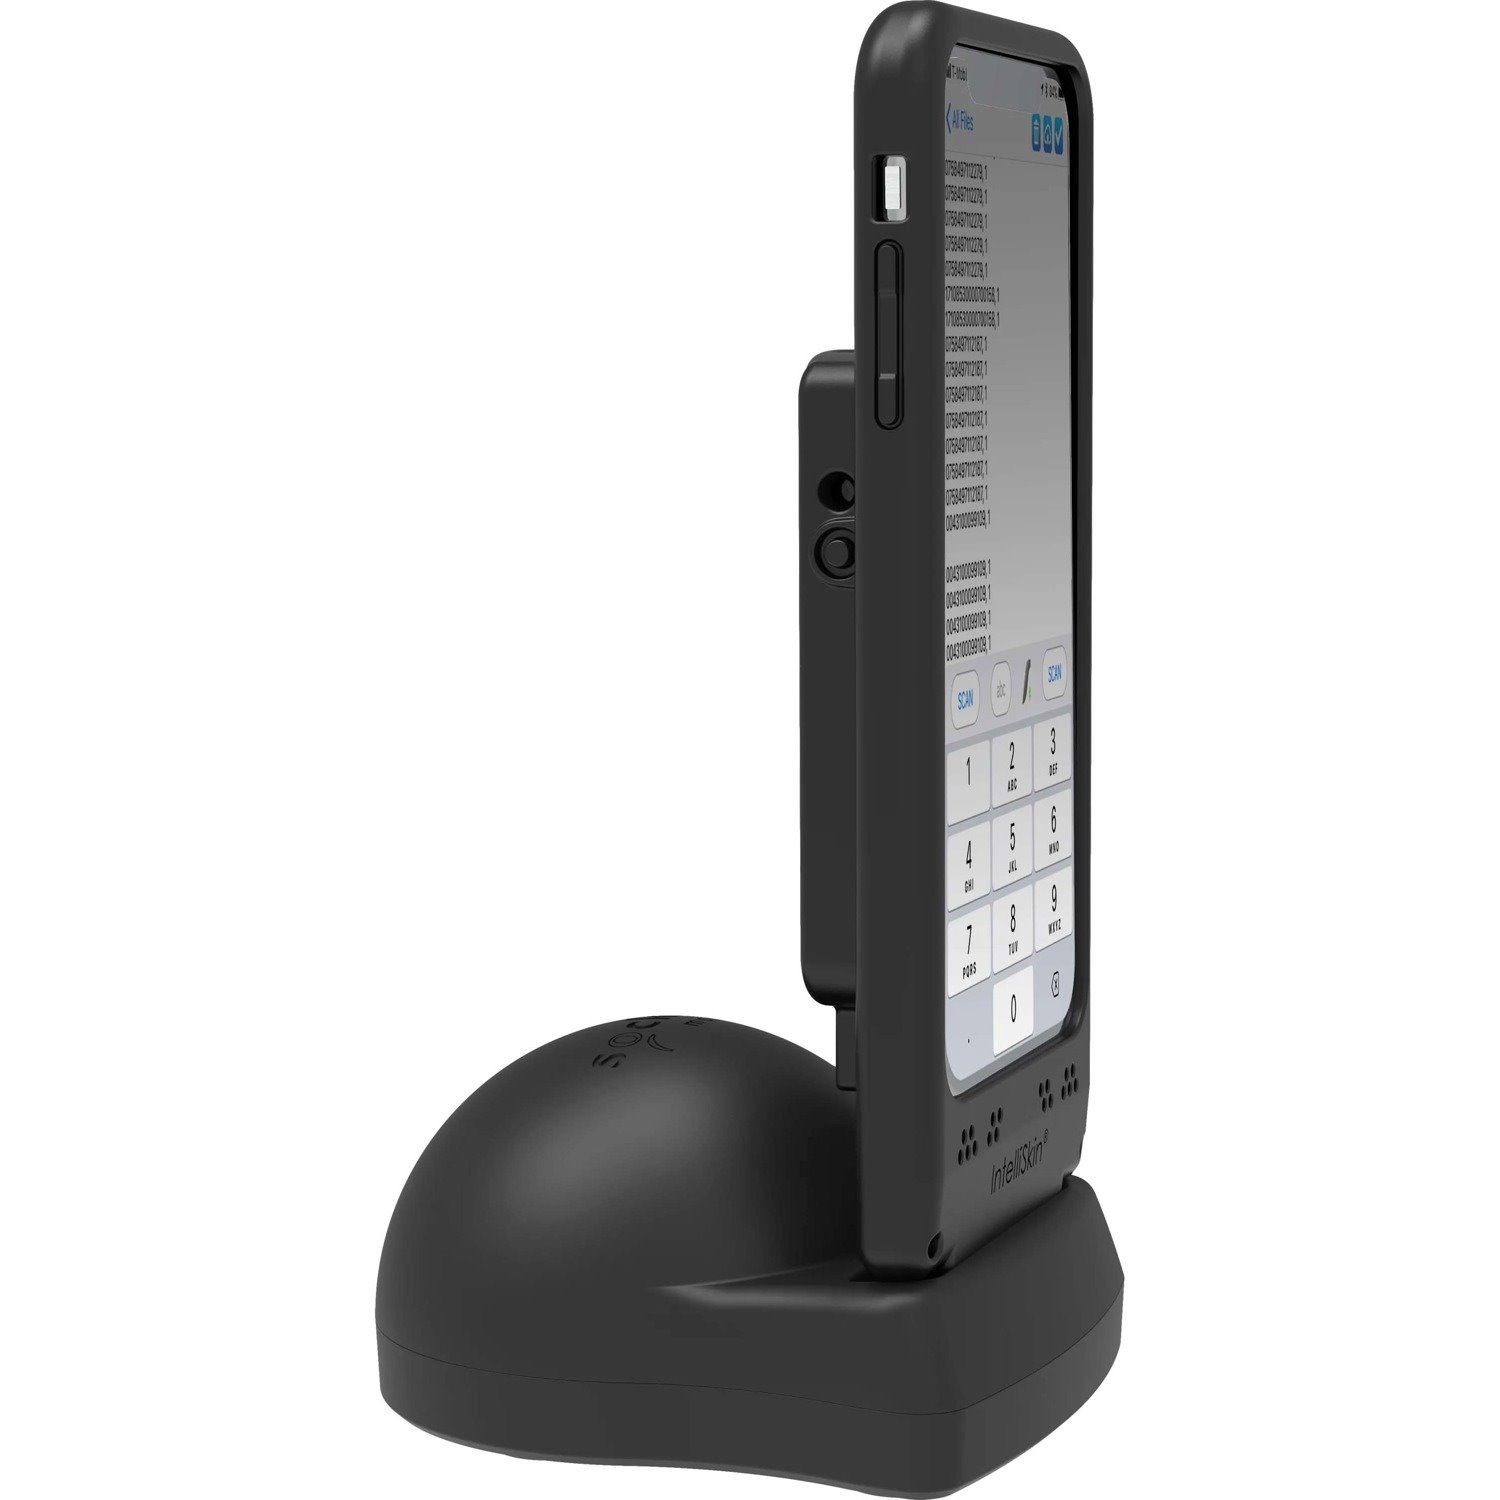 Socket Mobile DuraSled DS820 Retail, Hospitality, Logistics, Inventory, Transportation, Warehouse, Field Sales/Service Barcode Scanner - Wireless Connectivity